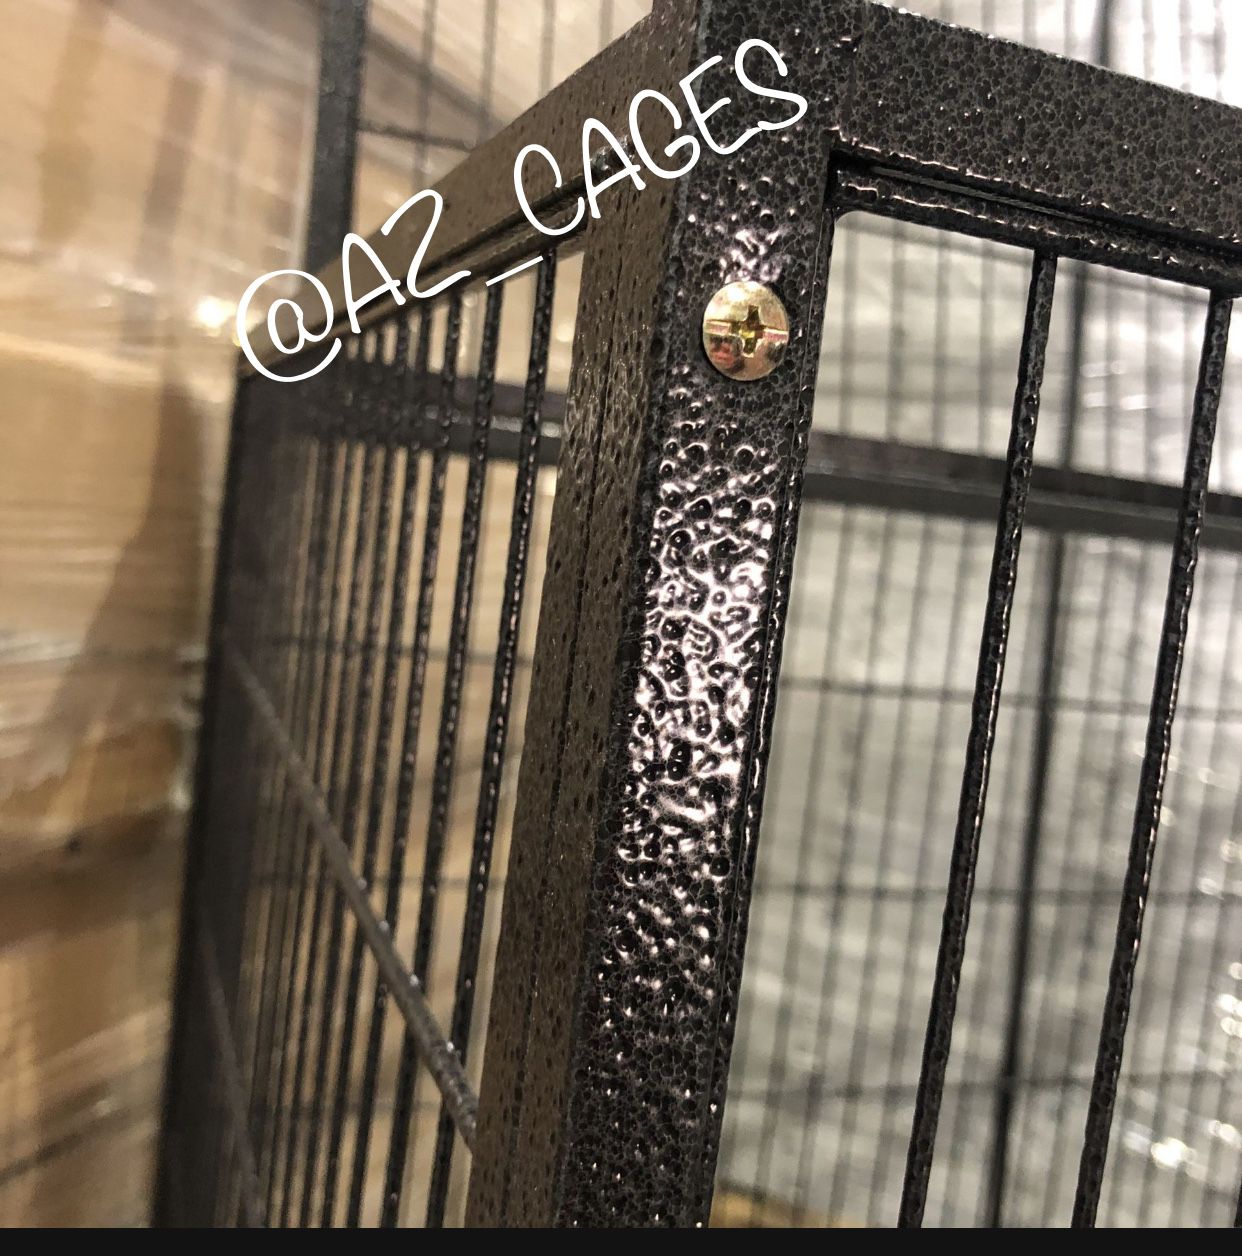 Brand New 37” Heavy Duty Dog Pet Kennel Crate Cage 🐕‍🦺🐩🐶 please see dimensions in second picture 🇺🇸 